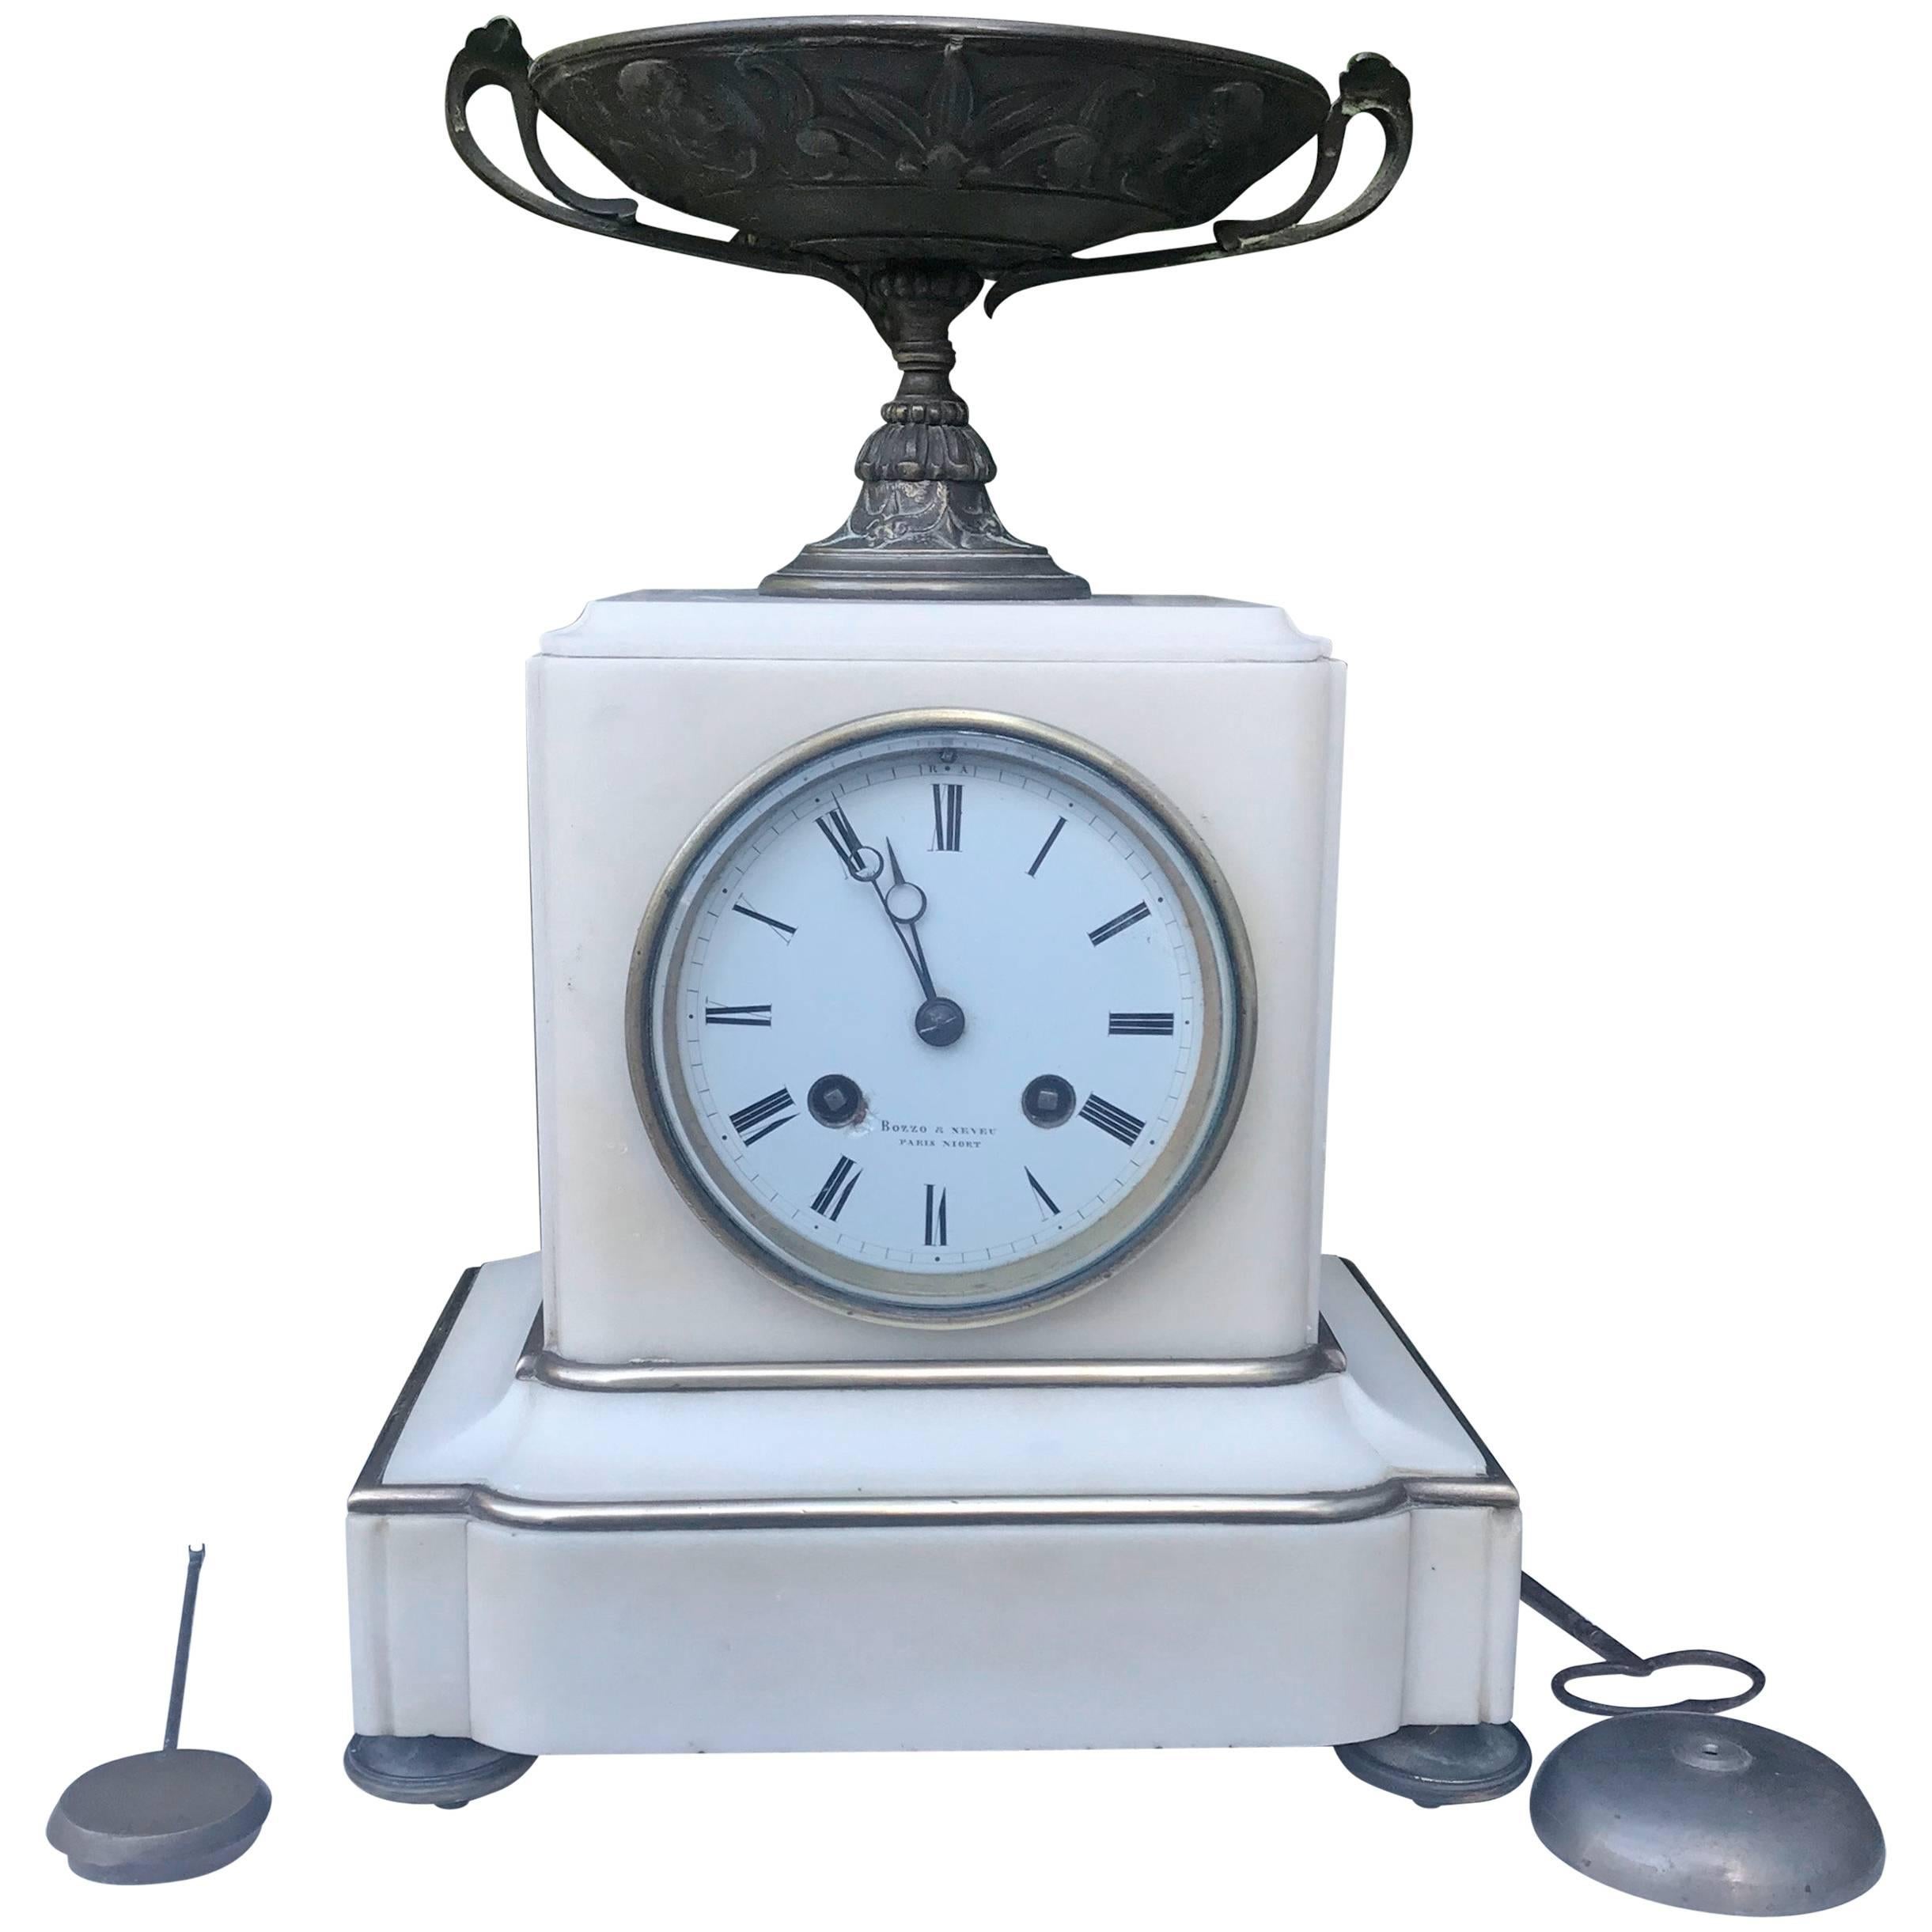 Mid-19th Century Neoclassical Revival White Marble and Bronze Mantel Clock